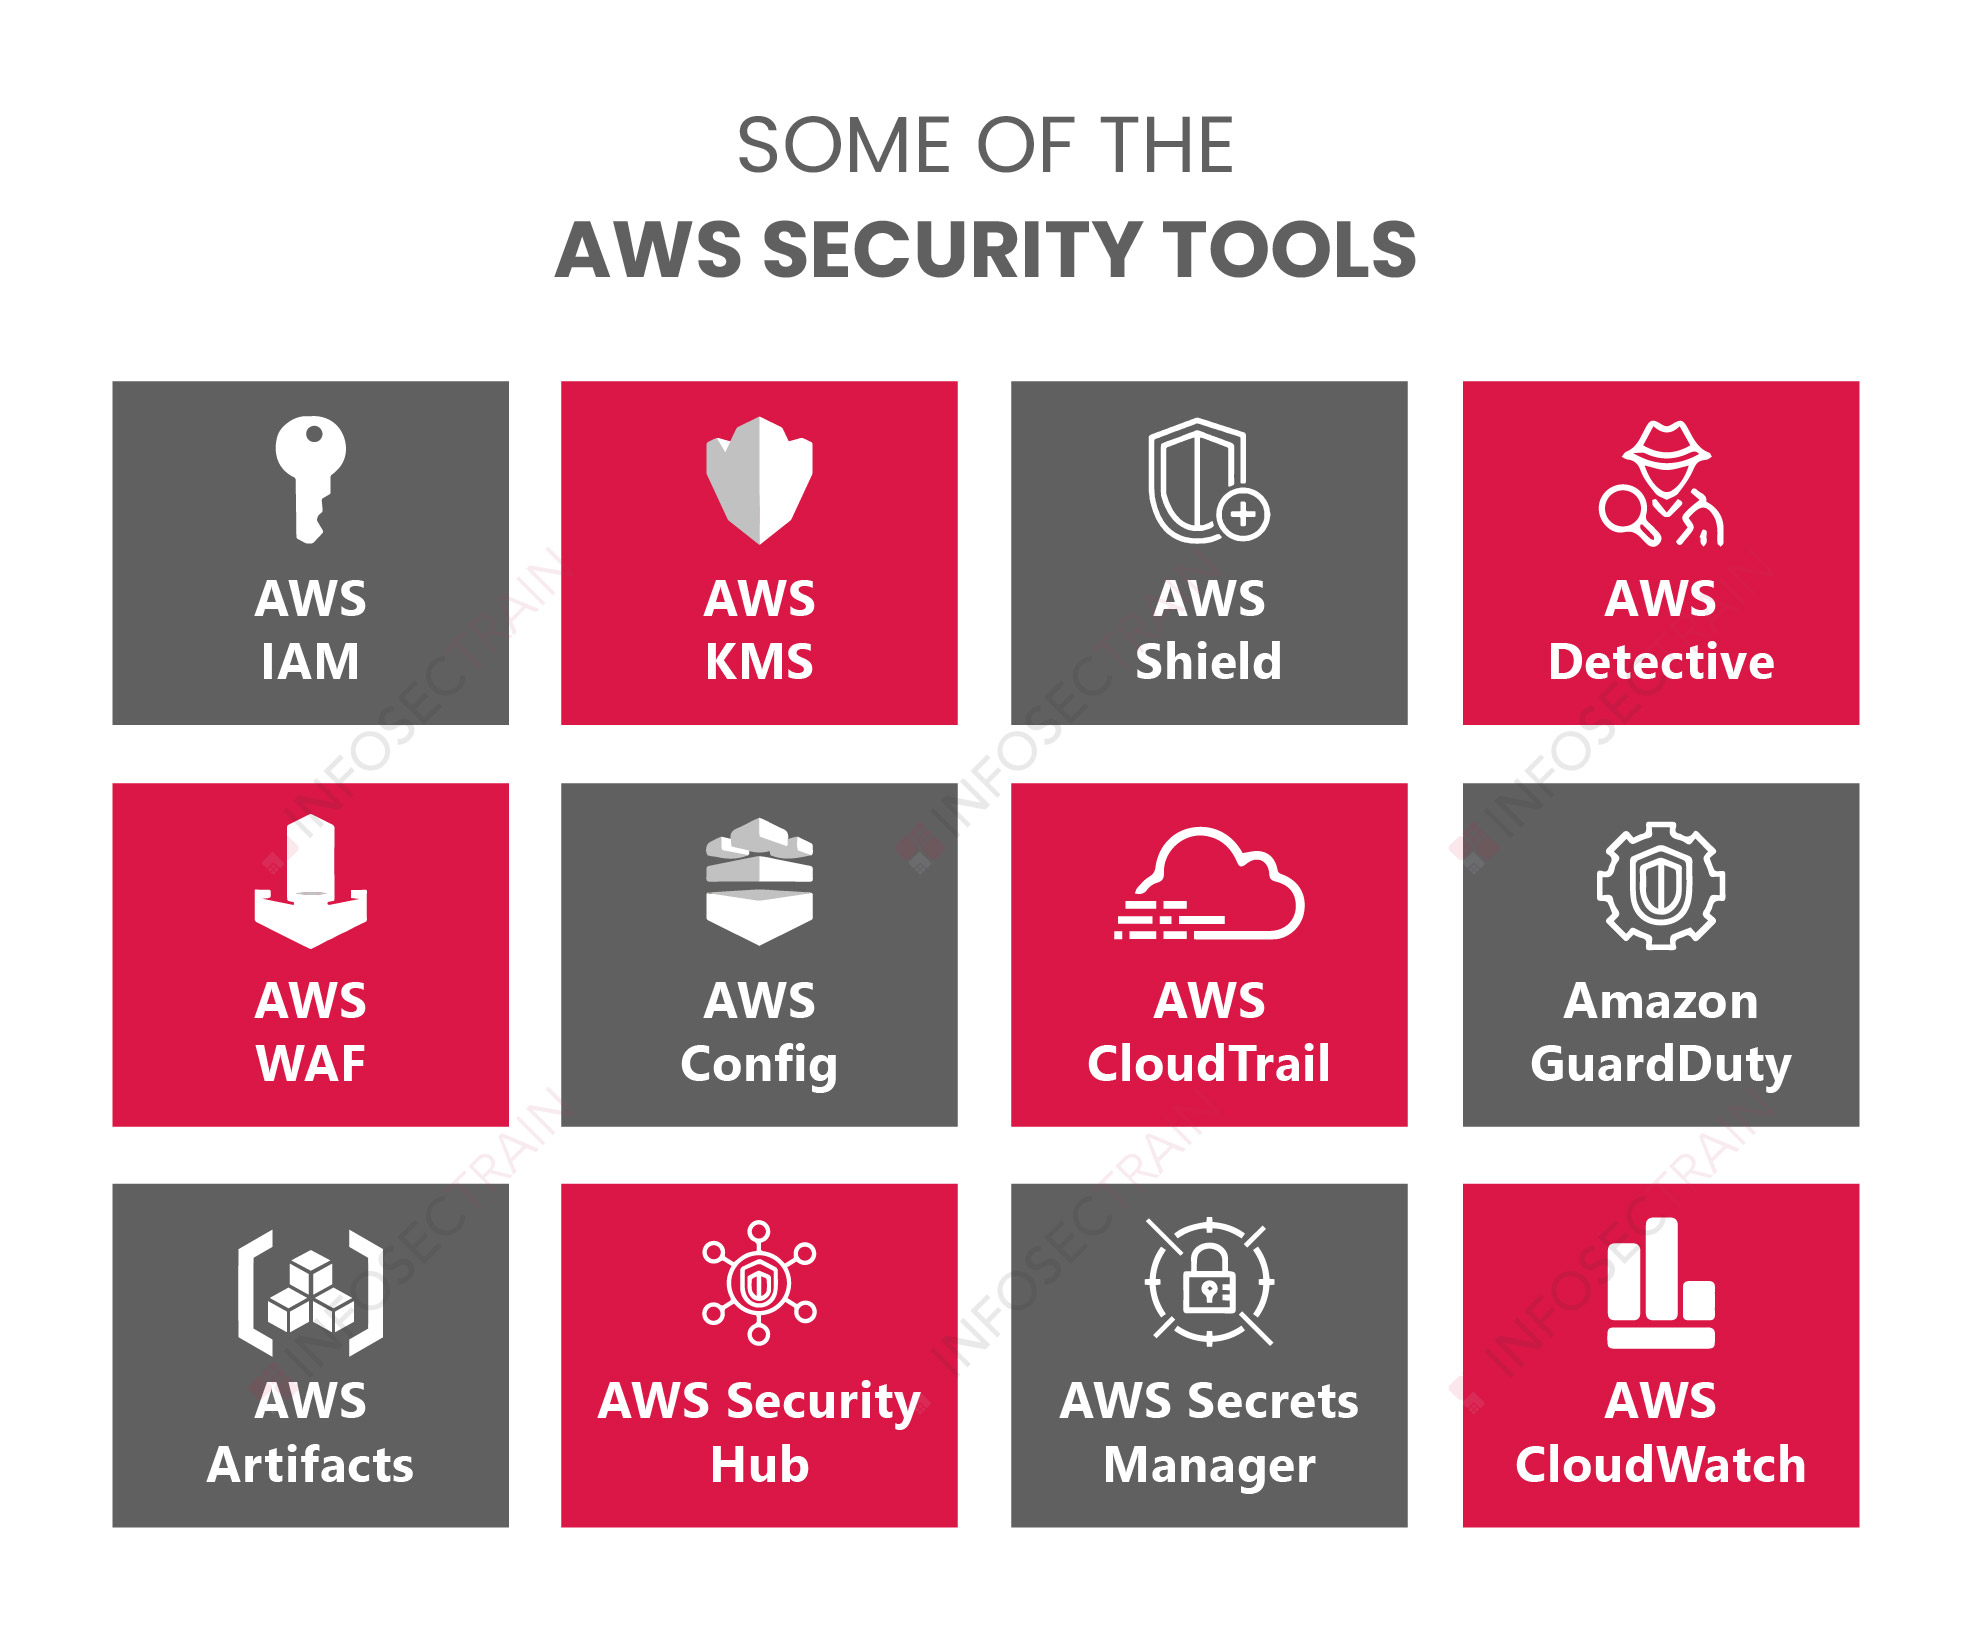 Diving Deeper into AWS Security Architecture: A 13-Part Blog Series